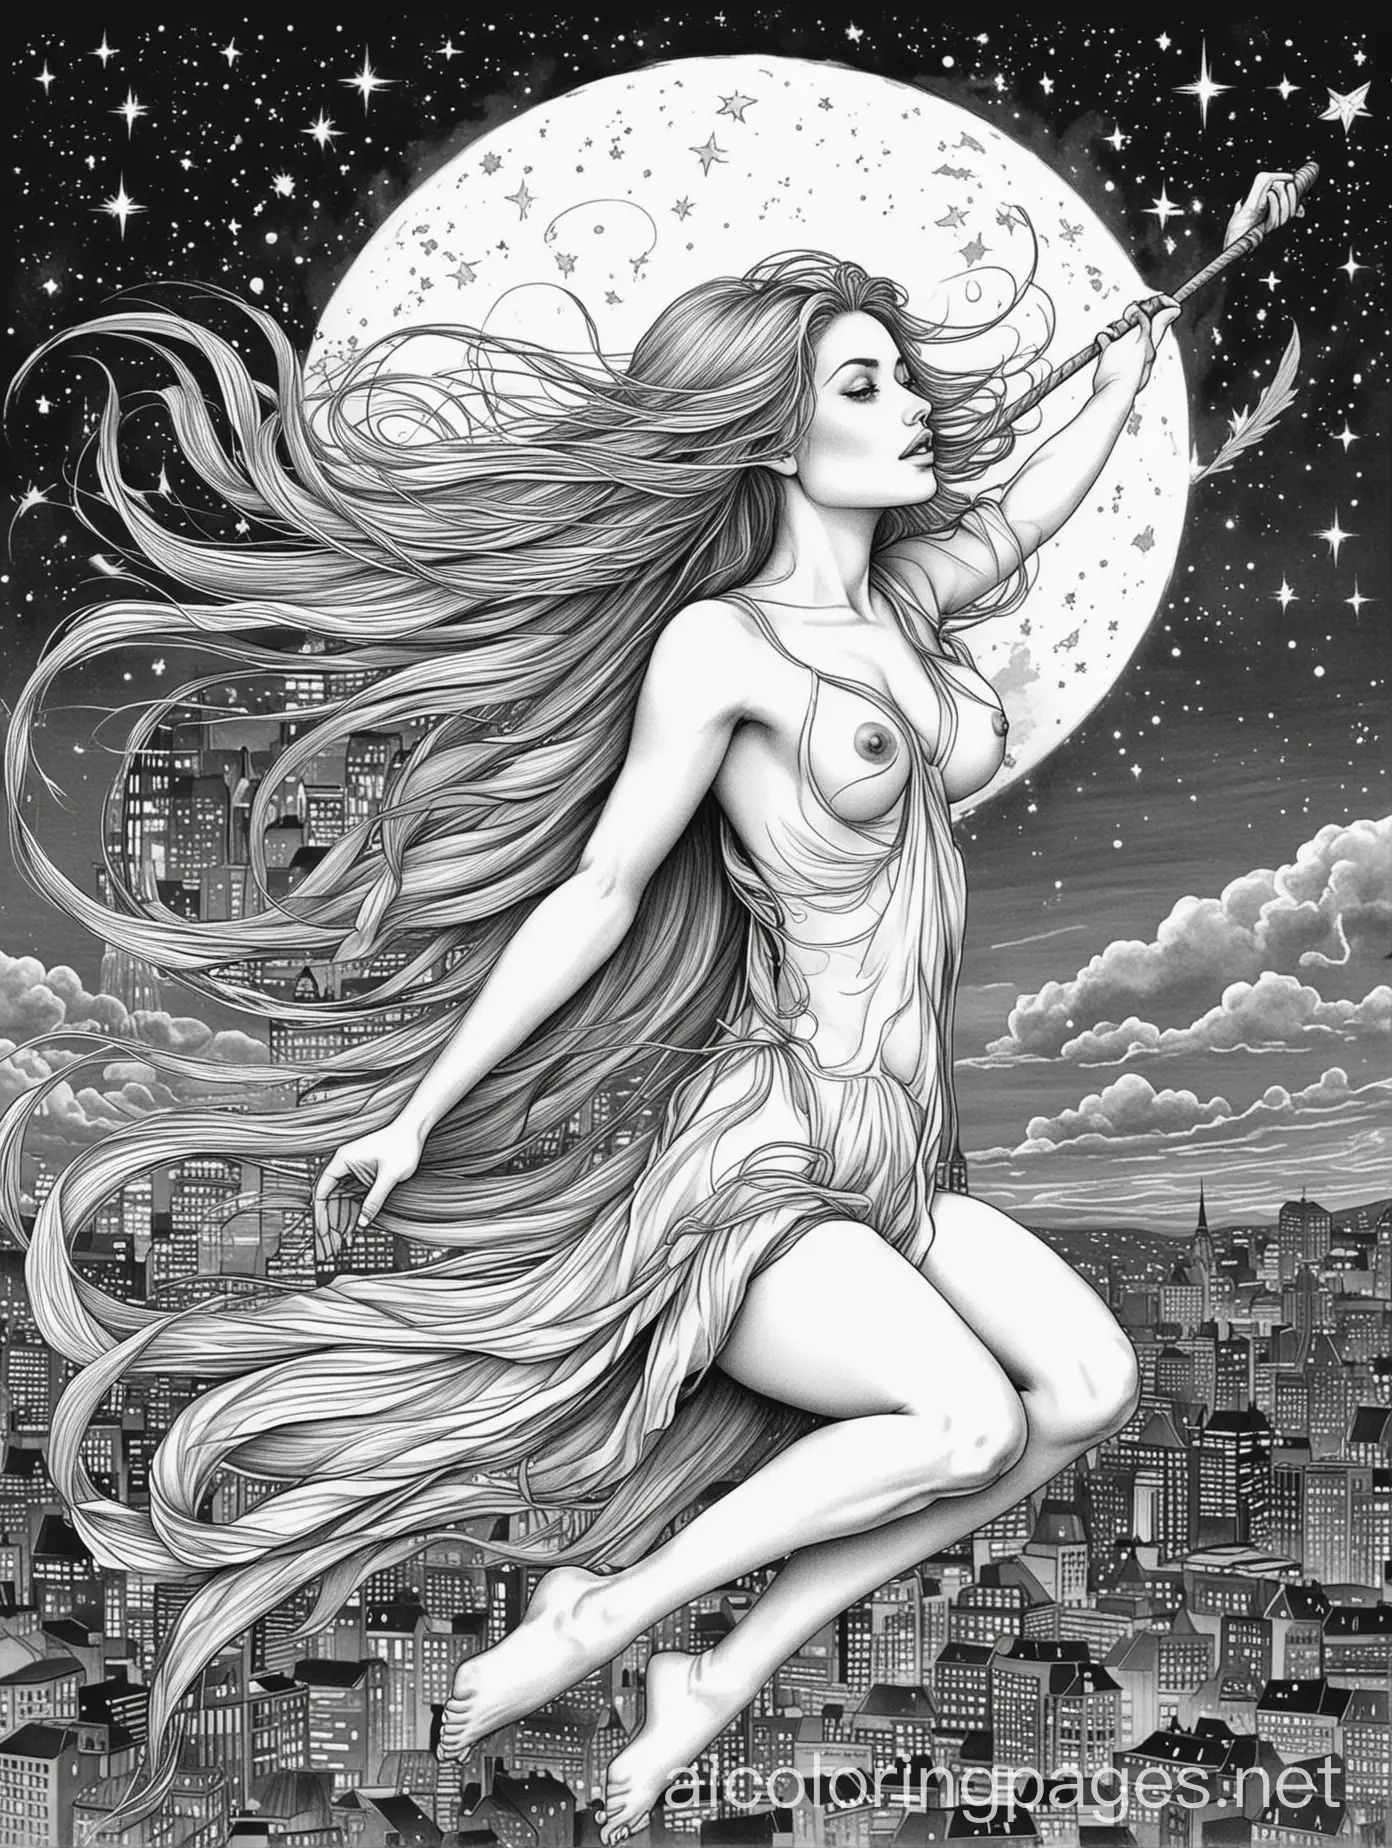 Nude woman with long hair is flying in the night sky sitting on a broomstick, leaning her body forward, she has a look of delight on her face, her hair is fluttering in the wind, she is flying against a background of city buildings, colouring page, black and white, line drawing, white background, simplicity, lots of white space. The background of the colouring page is simply white to make it easy for children to colour within the lines., Coloring Page, black and white, line art, white background, Simplicity, Ample White Space. The background of the coloring page is plain white to make it easy for young children to color within the lines. The outlines of all the subjects are easy to distinguish, making it simple for kids to color without too much difficulty